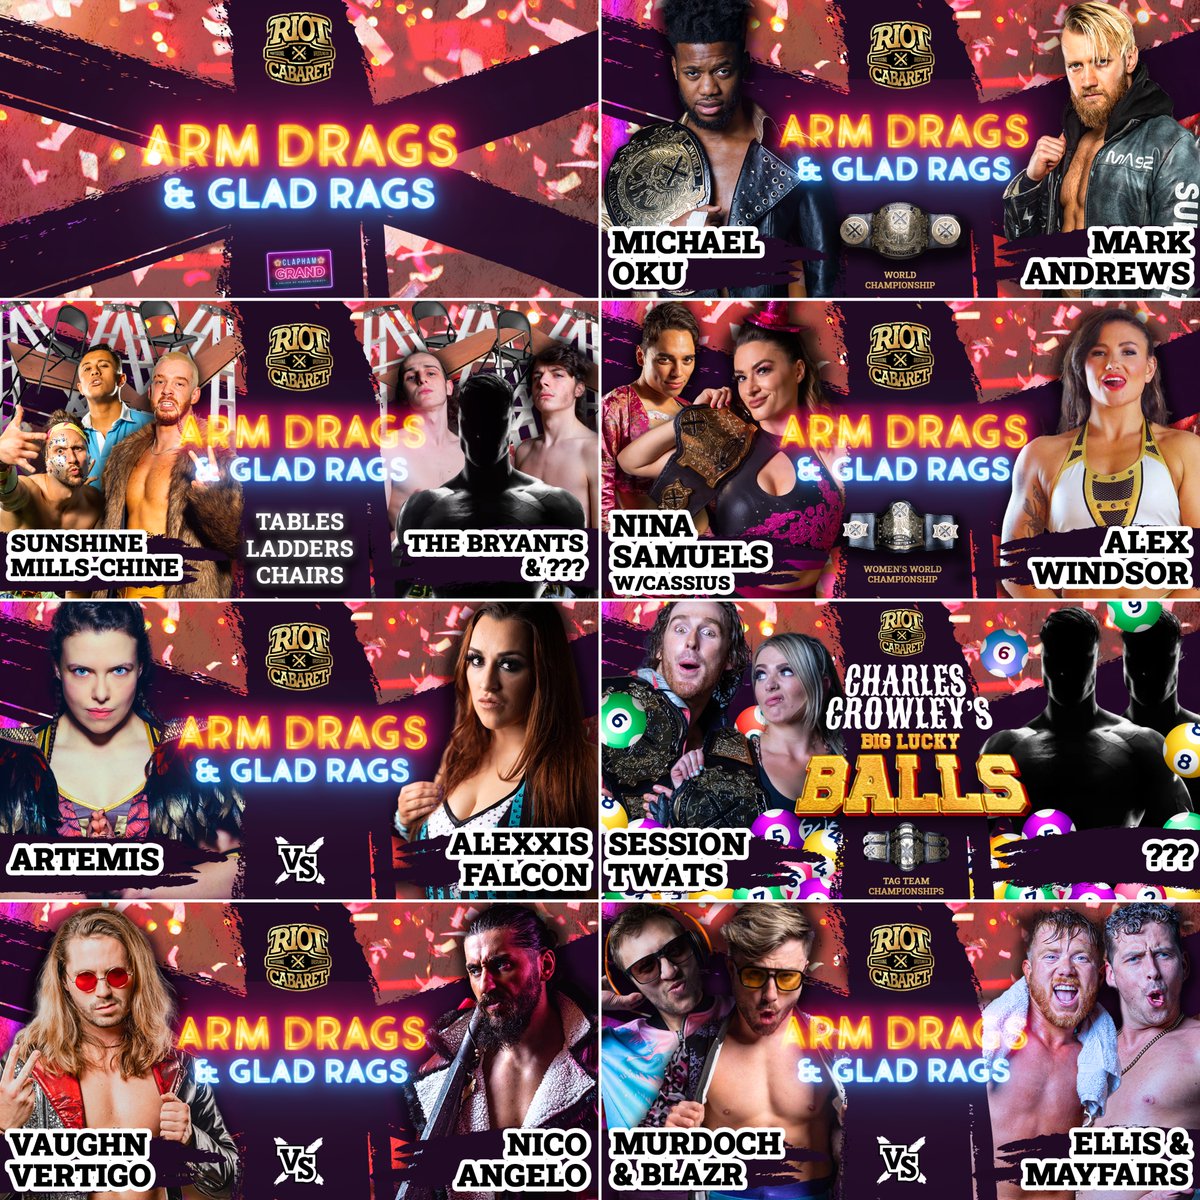 🔥 WHAT a card we have lined up for you on Tuesday at @TheClaphamGrand! ⚡️ Michael Oku vs Mark Andrews in a first time ever dream match with the World Championship on the line 👑 Alex Windsor looks to end the 600+ day reign of Nina Samuels 🪜 Our first ever Tables, Ladders and…